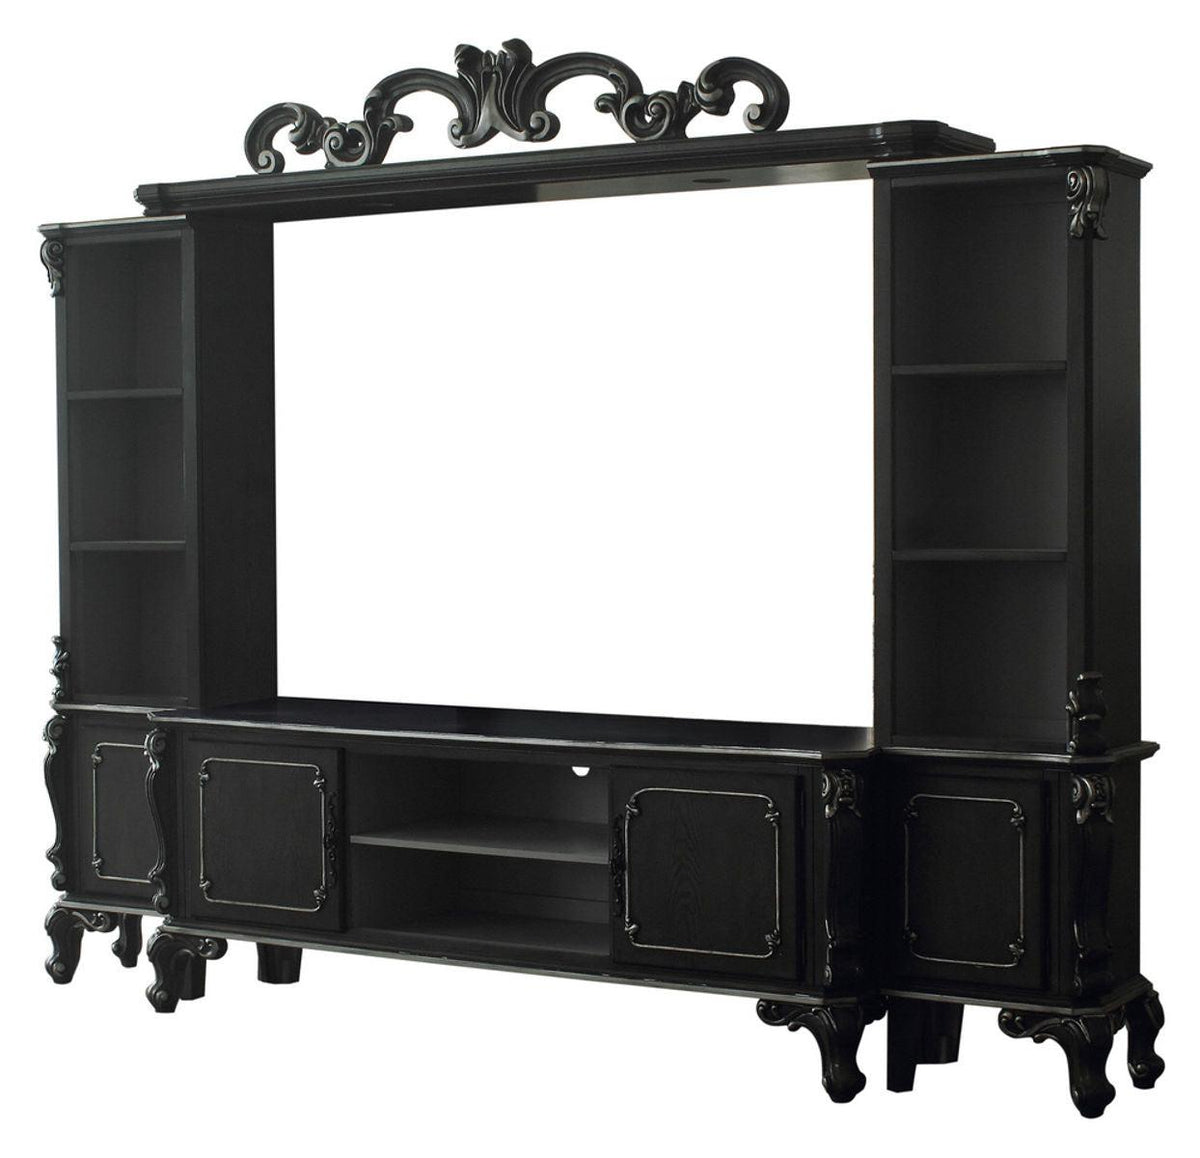 Acme Furniture House Delphine Entertainment Center in Charcoal 91985  Half Price Furniture